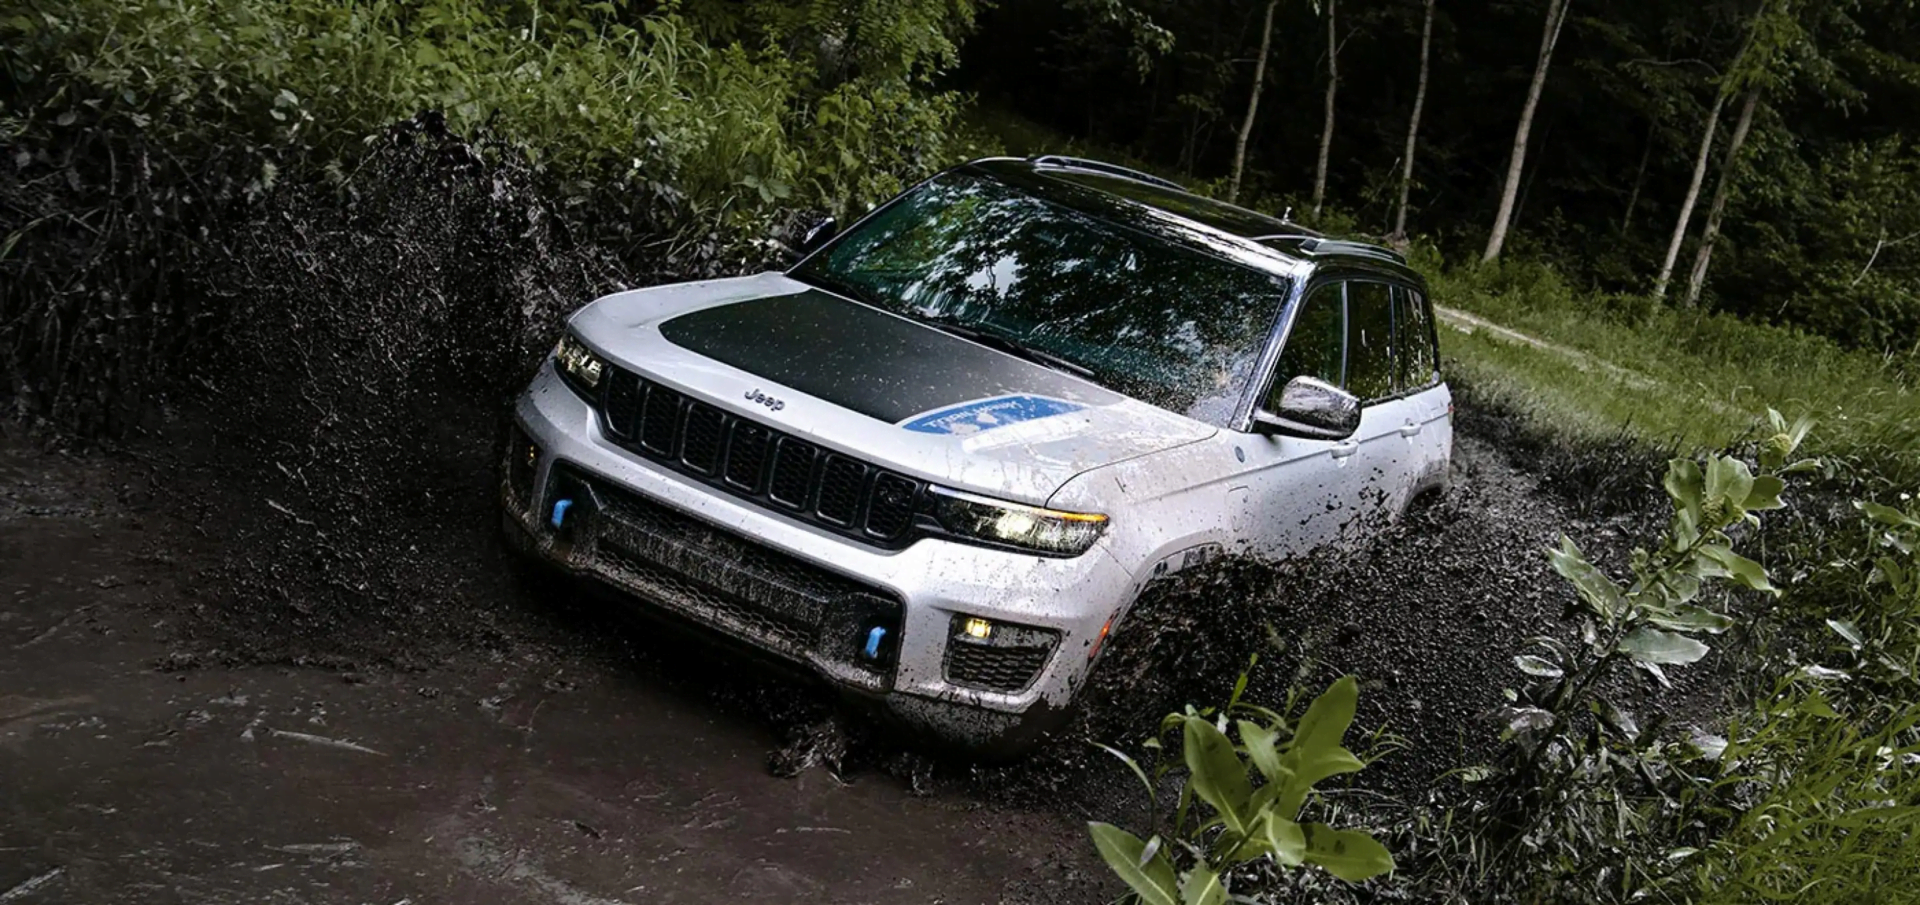 A 2023 Jeep Grand Cherokee, one of the Trail Rated Jeep models, fording water in the forest